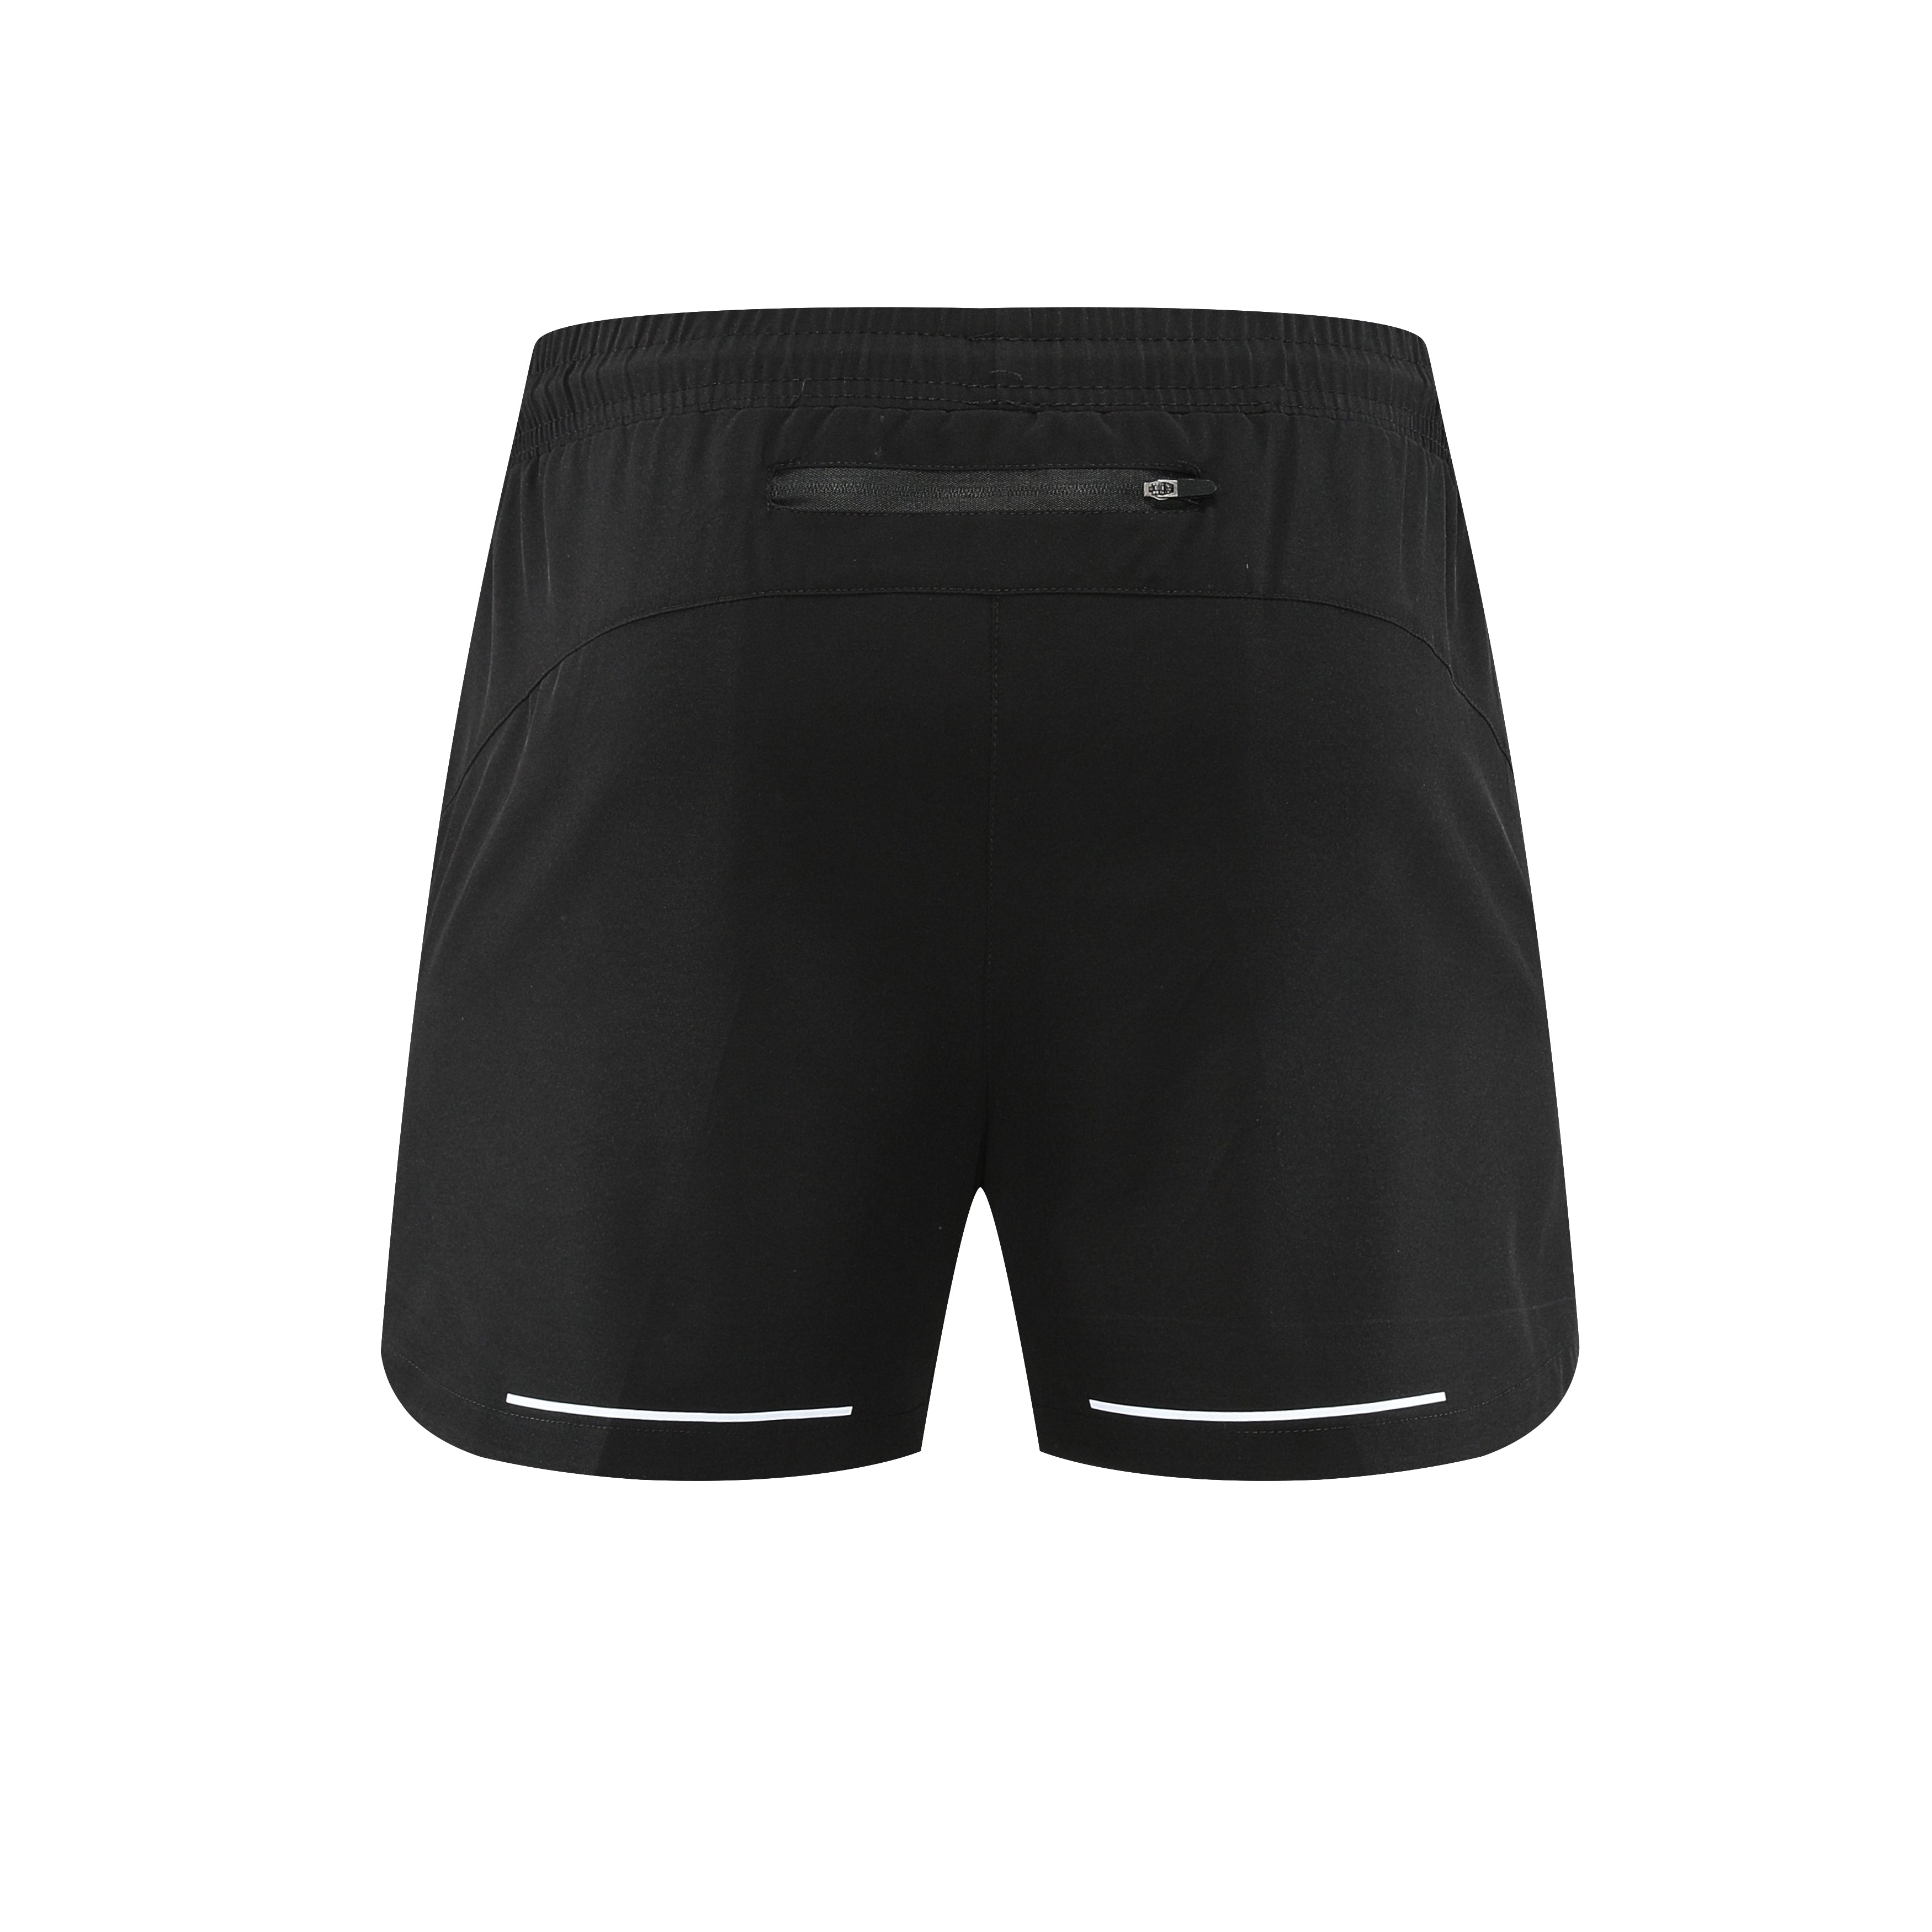 Men's Quick Dry Stay Wild Graphic Shorts